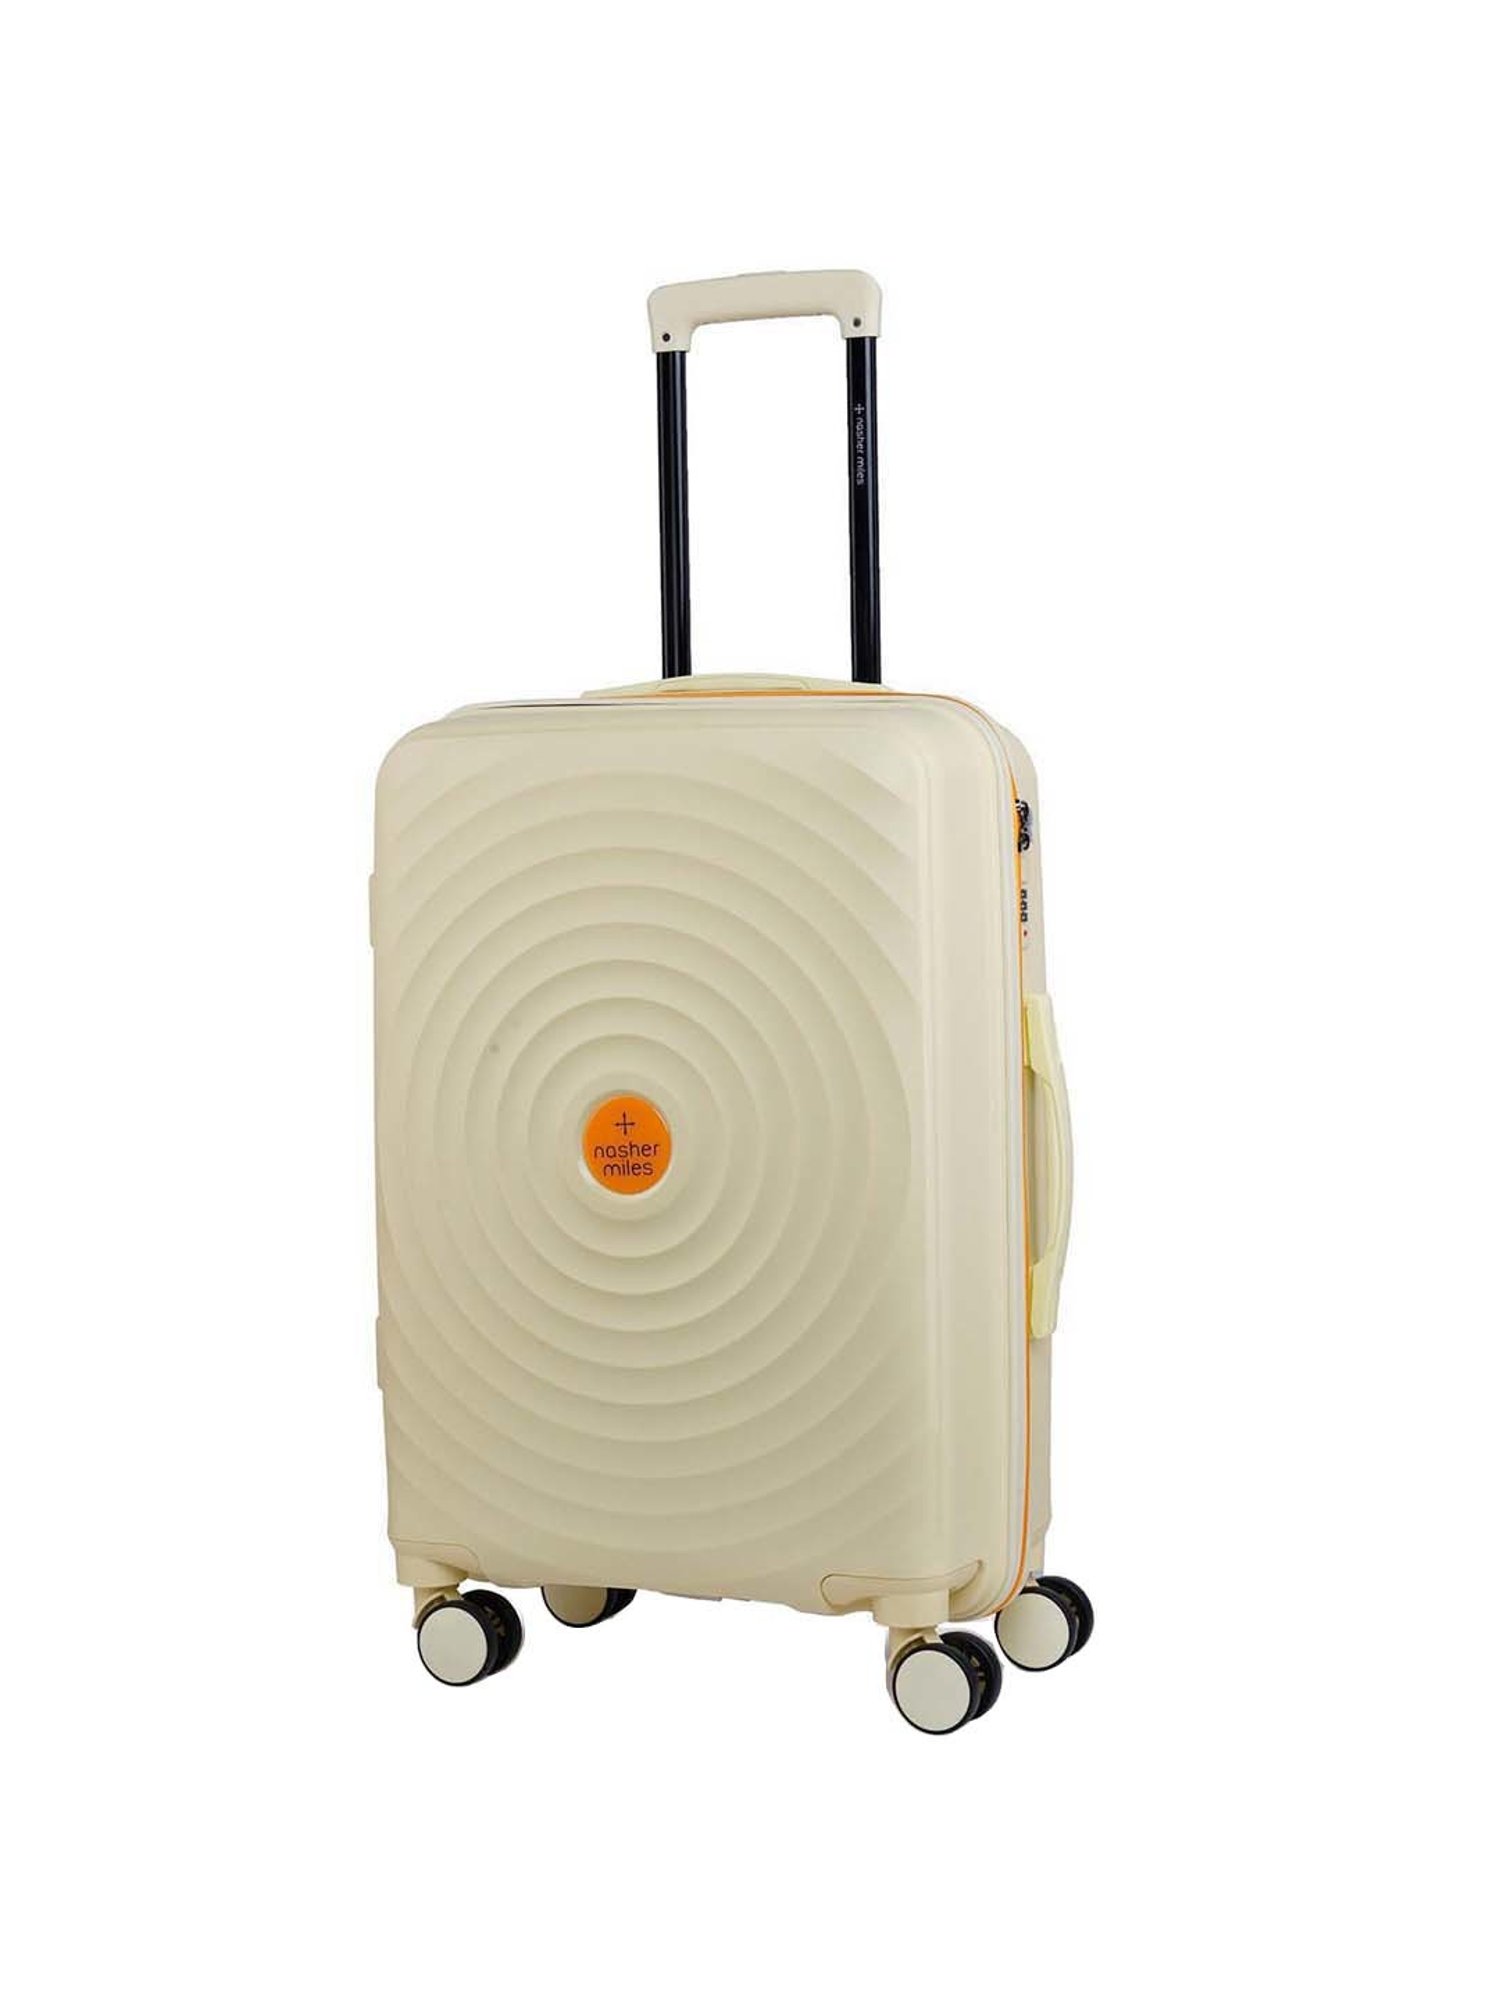 24 Inches Foldable Carry On Luggage Case Trolley Suitcase With Pc Material  Lightweight Foldable Suitcase Luggage Bag  Fruugo IN